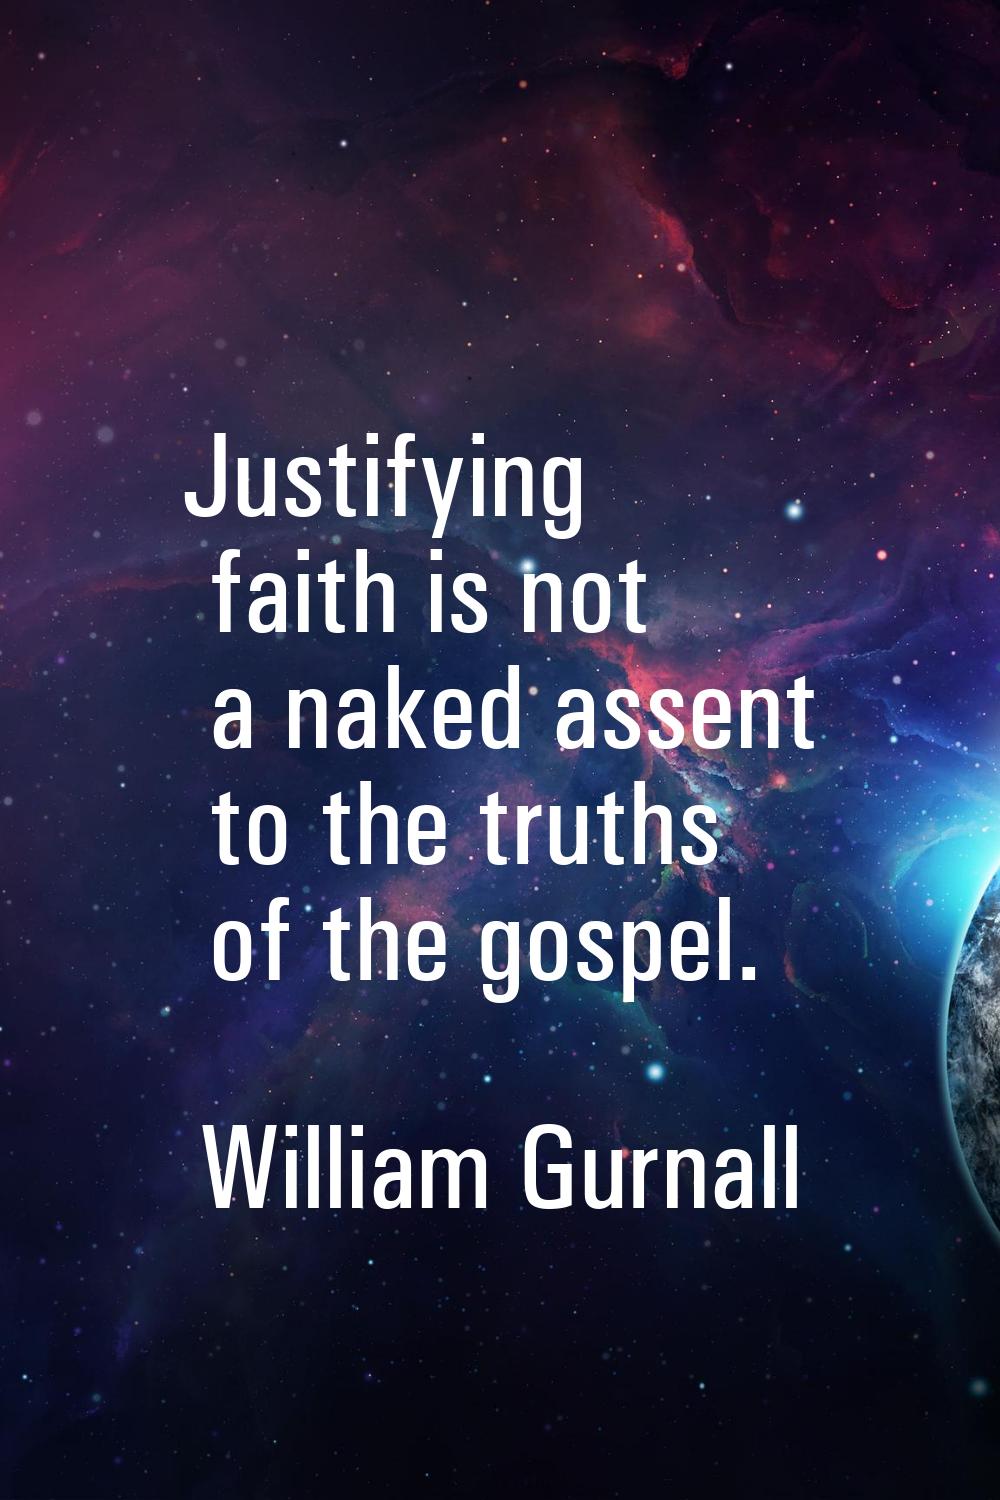 Justifying faith is not a naked assent to the truths of the gospel.